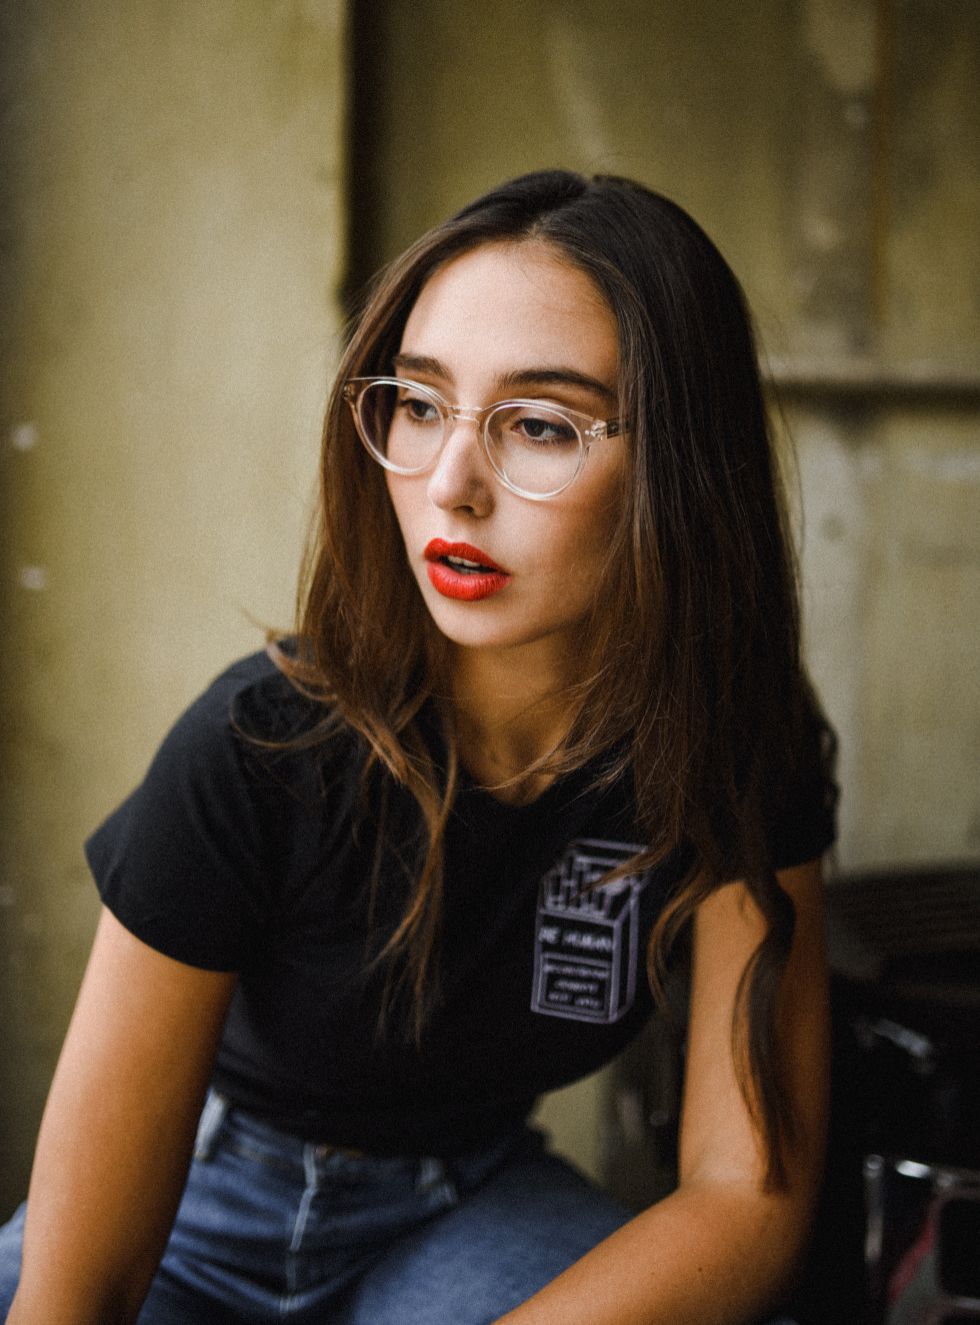 vintage portrait of girl with red lipstick and glasses